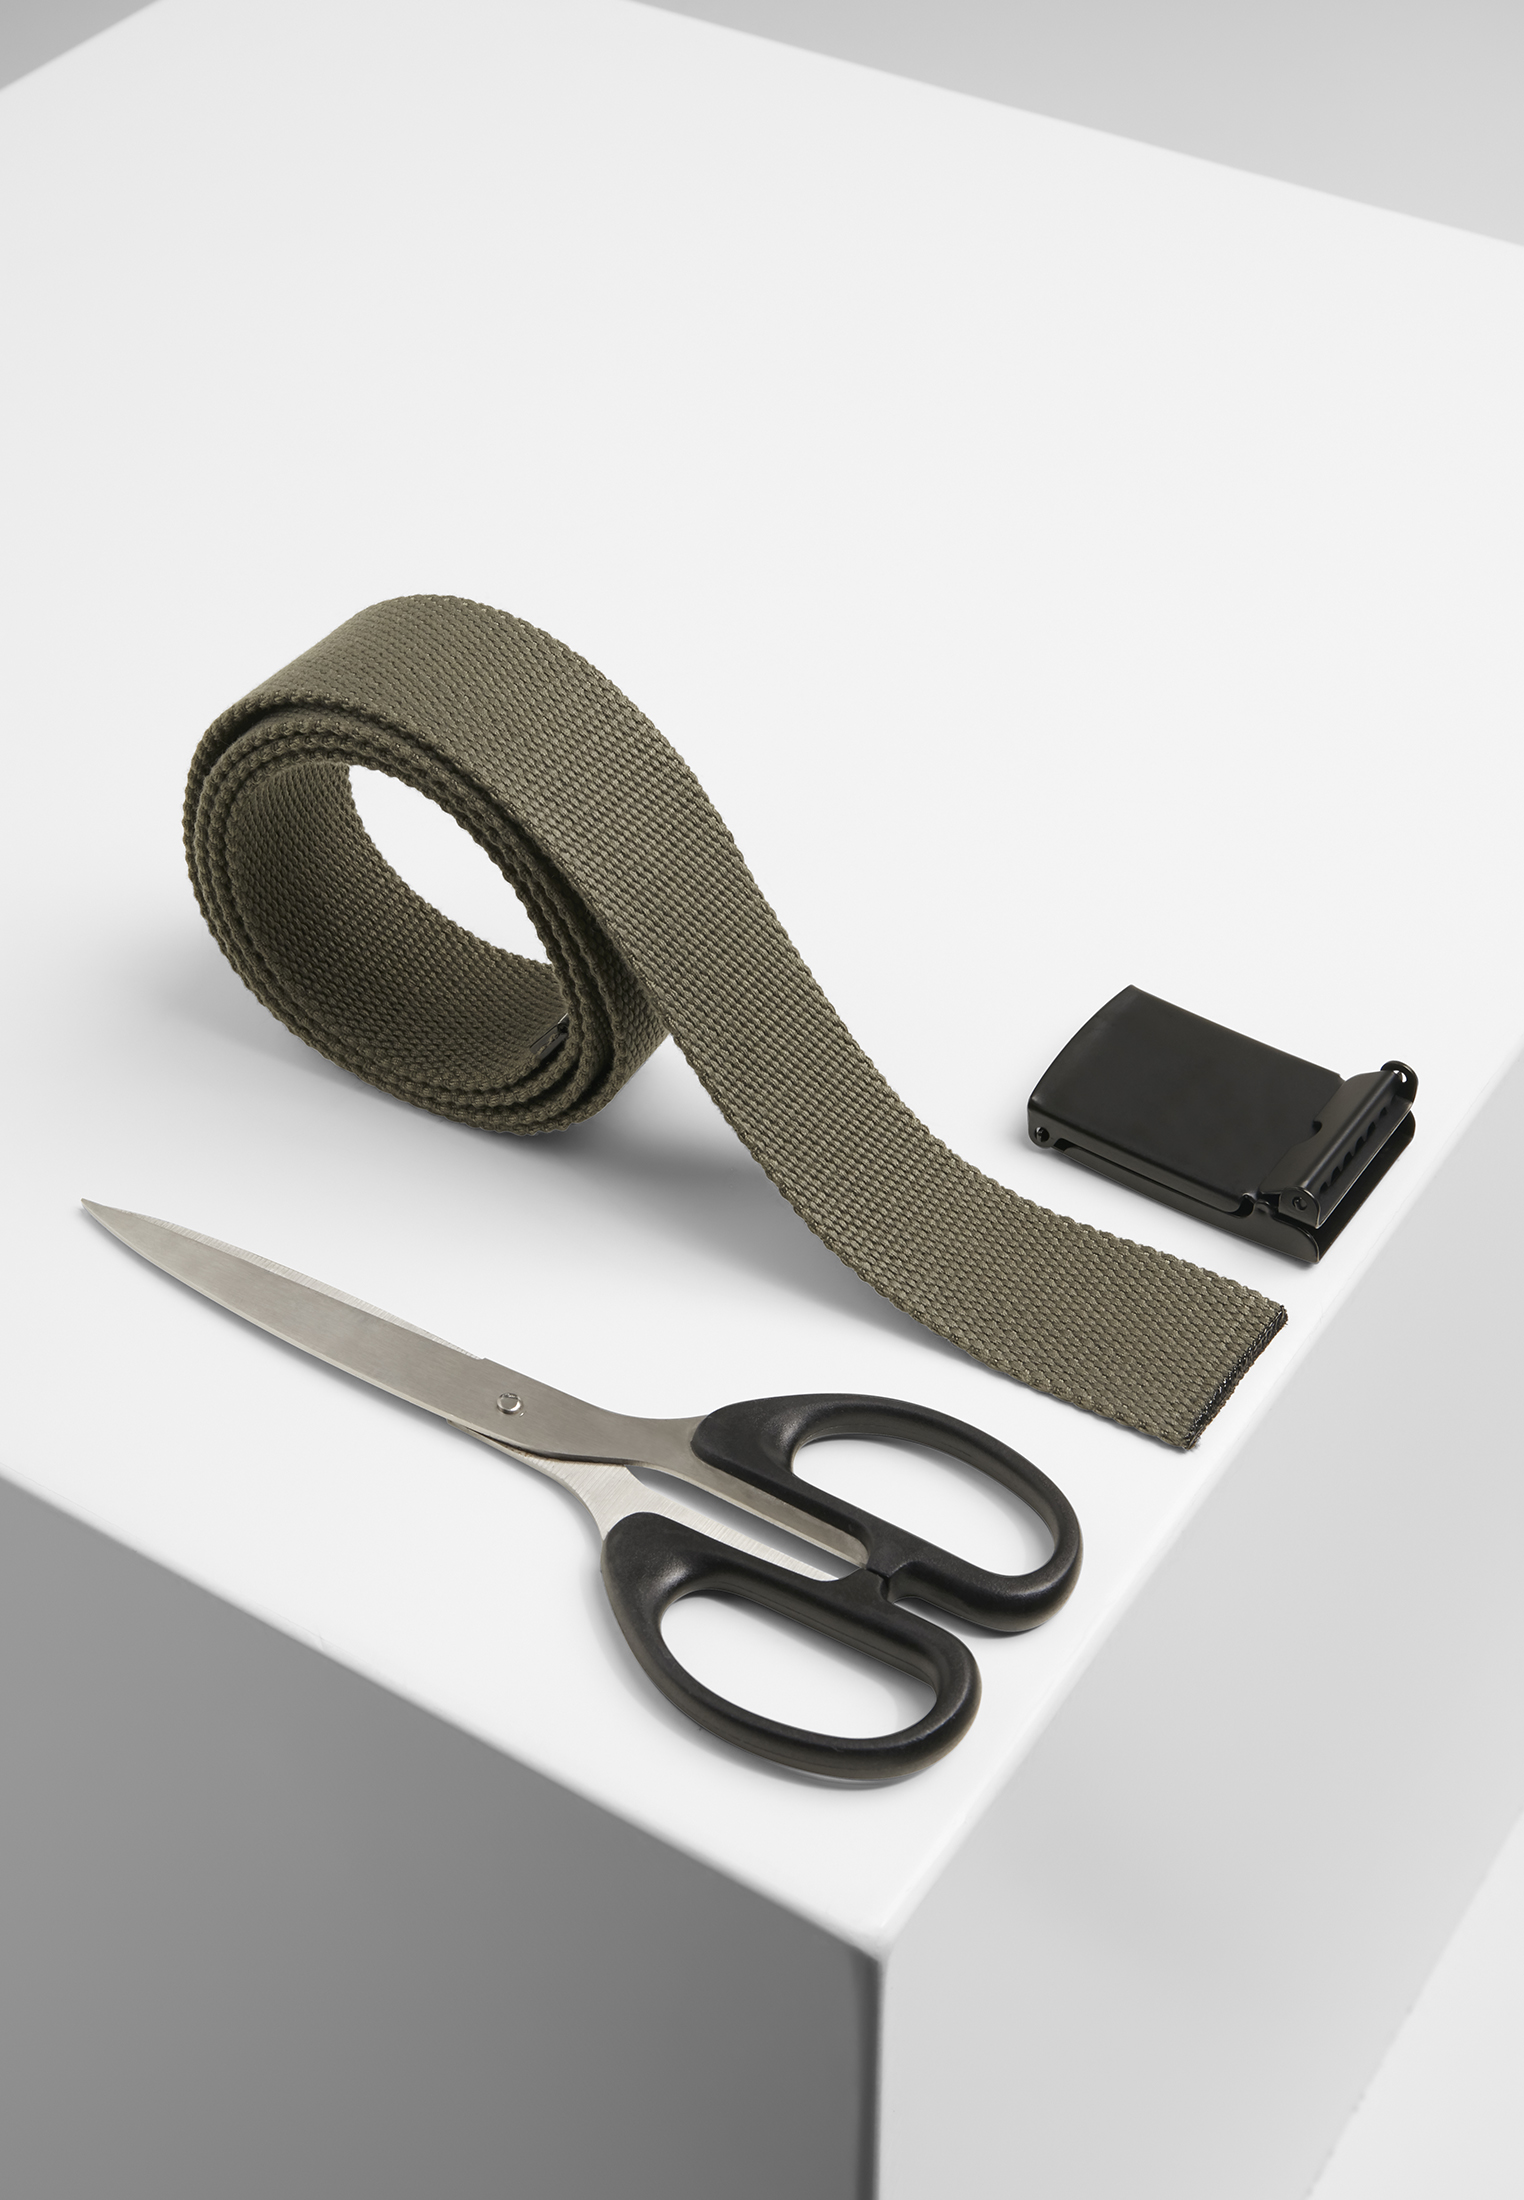 G?rtel Canvas Belts in Farbe olive/black